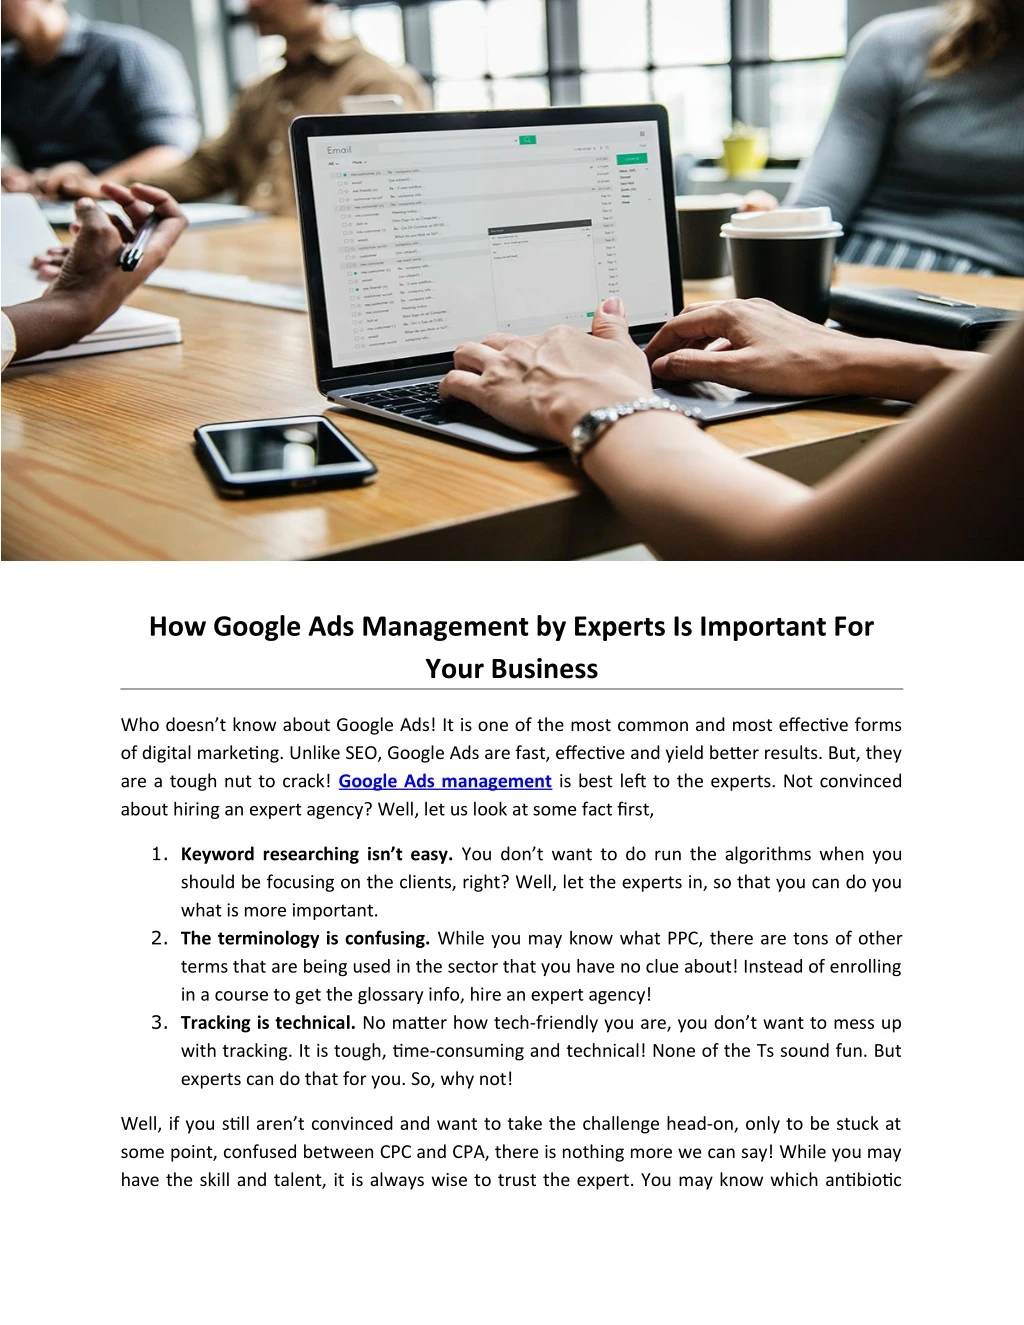 how google ads management by experts is important